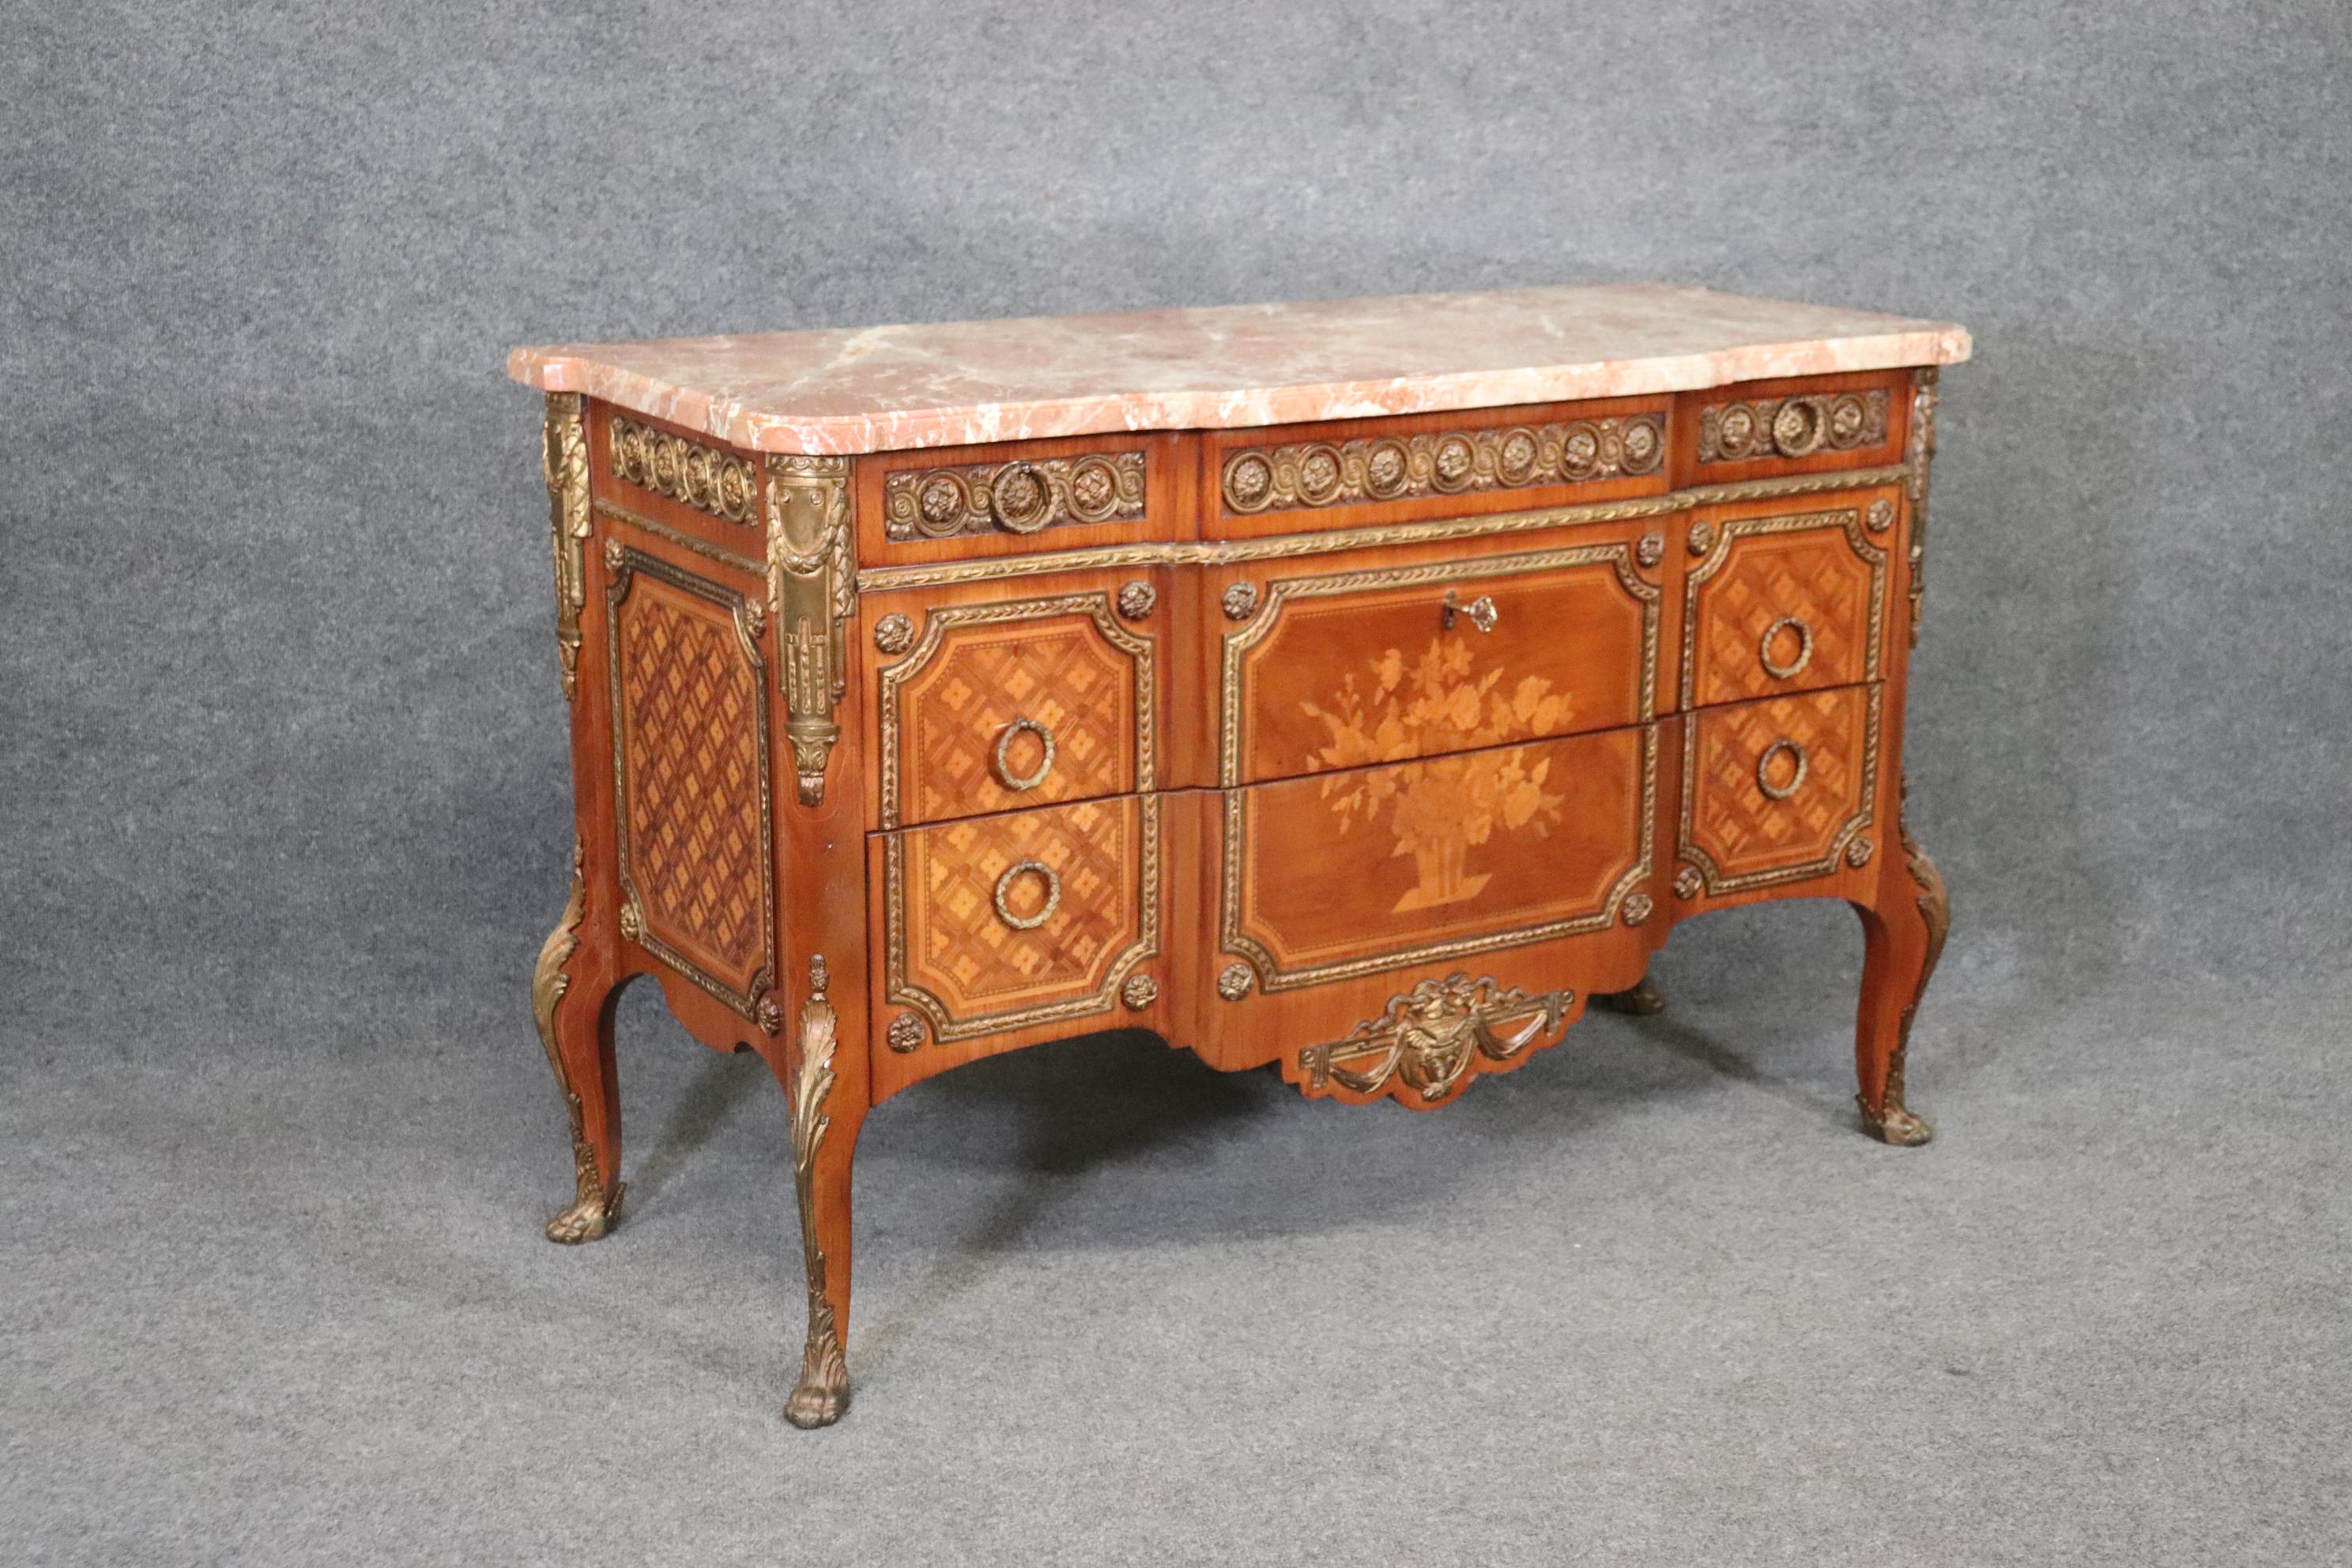 This Antique French Louis XV Style inlaid marble top commode is truly breathtaking! If you look closely at the photos provided you will see the intricate inlaid marquetry design throughout the front and sides of the piece as well as the attention to